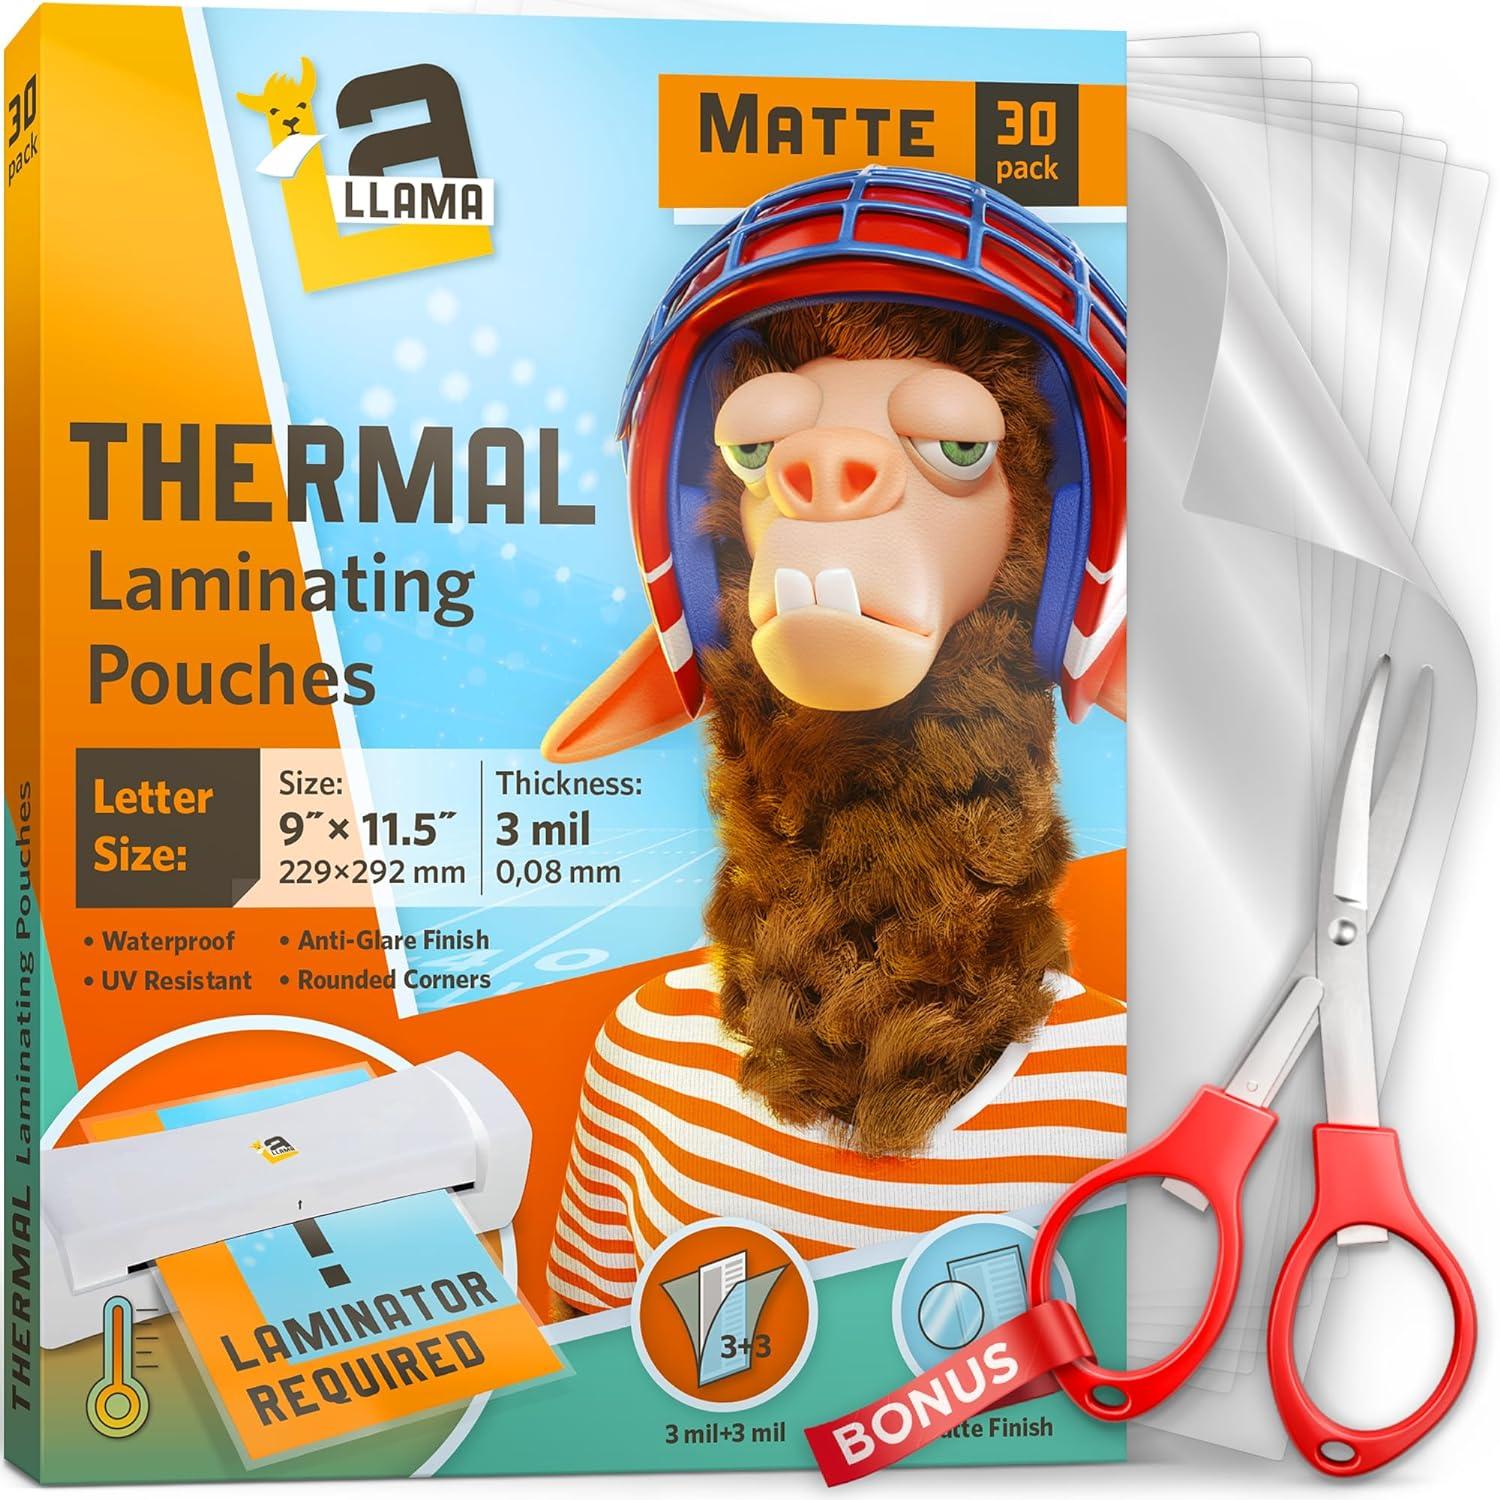 matte thermal laminating pouches matte finish 9 x 11 5 inches 3 mil thick 30 pack suited for letter size